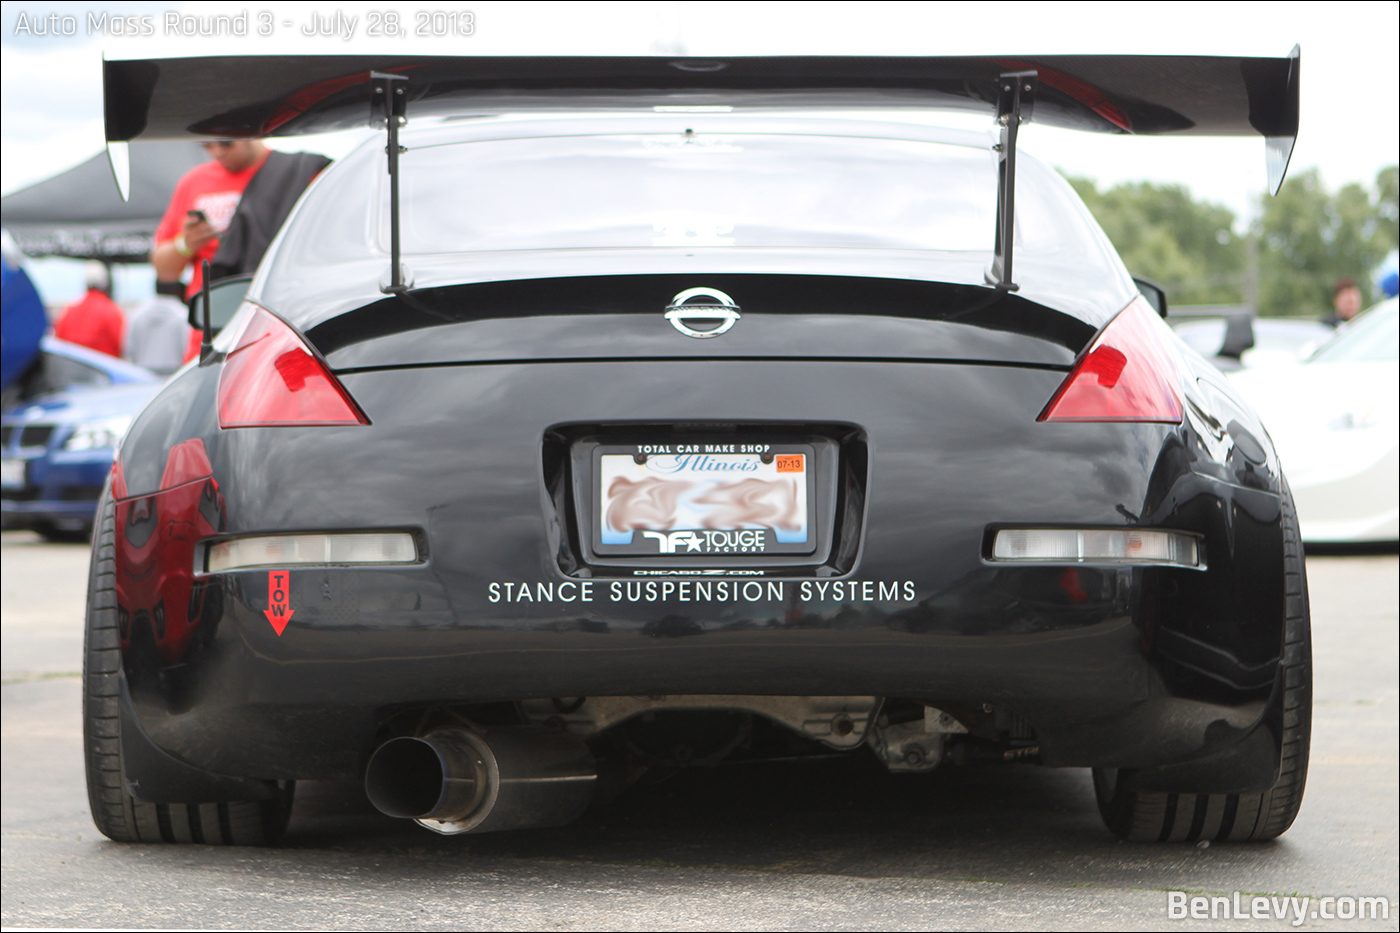 Nissan 350Z with Large Wing